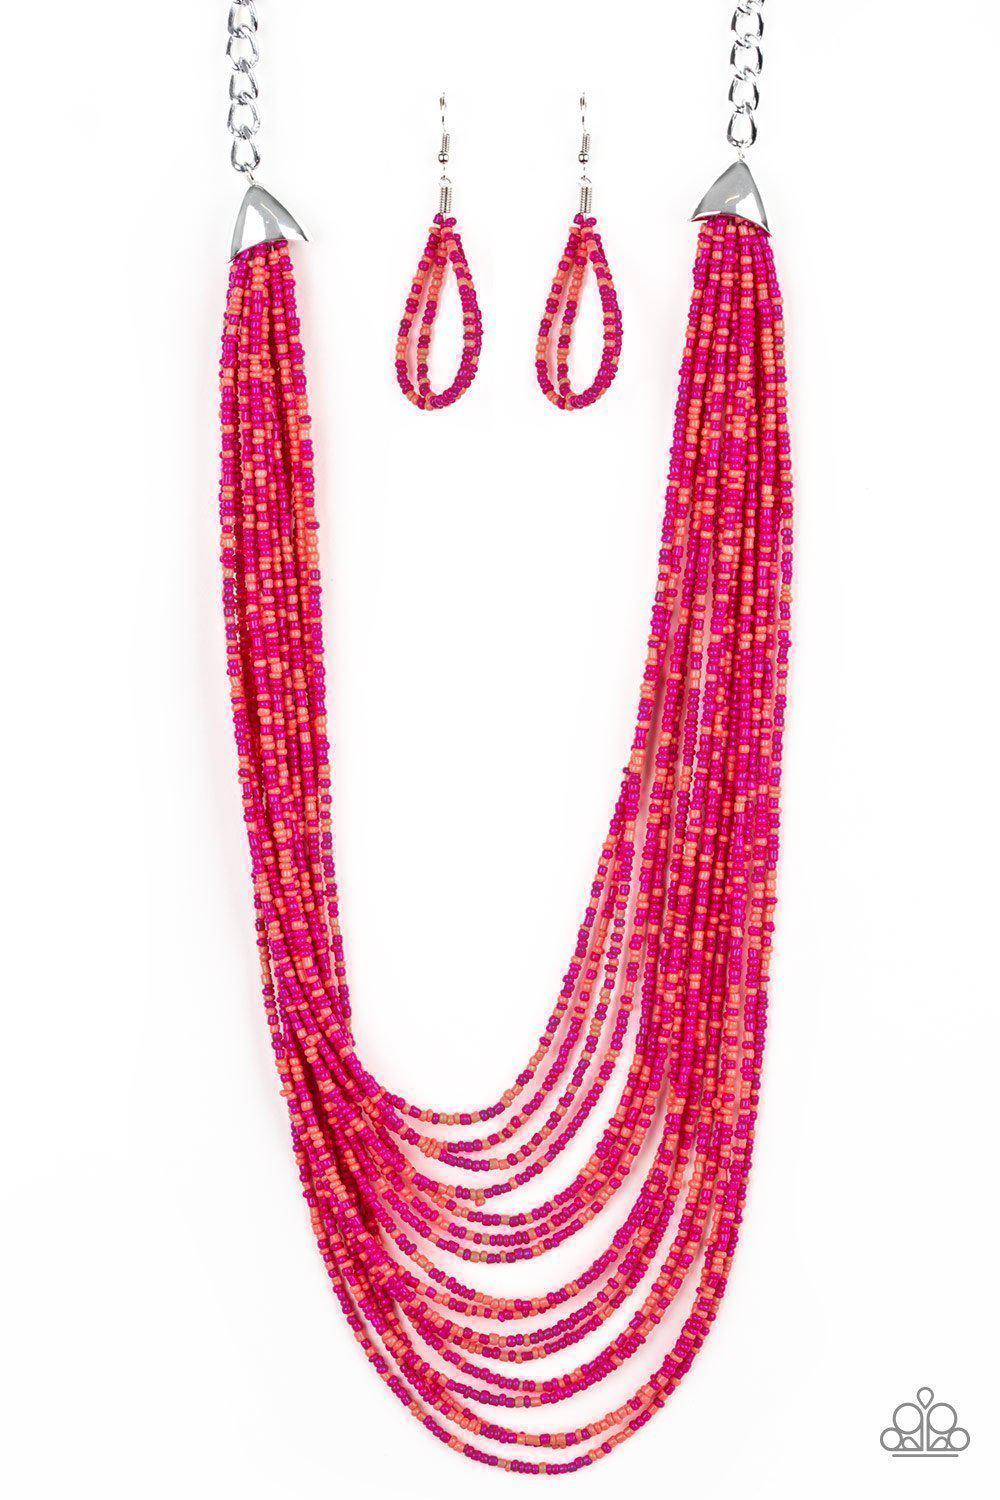 Peacefully Pacific Pink and Coral Seed Bead Necklace and matching Earrings - Paparazzi Accessories-CarasShop.com - $5 Jewelry by Cara Jewels